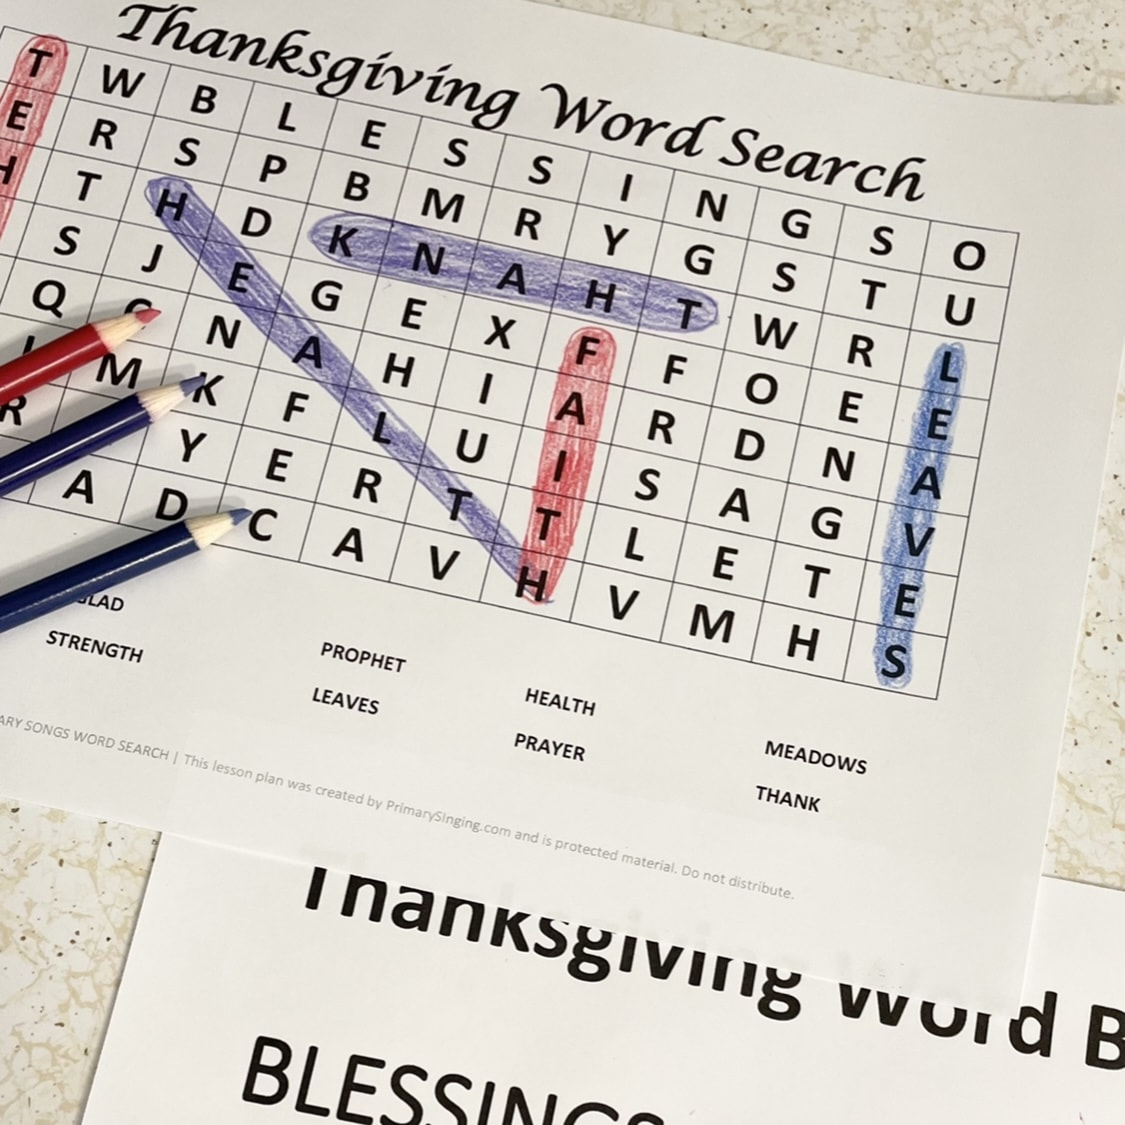 Easy singing time idea -- Have some fun with this Thanksgiving-themed word search while singing primary songs about gratitude! Have the kids see how many words they can find and how many songs they recognize! Then, sing the fall songs as you go! Printable song helps for LDS Primary Music Leaders. #LDS #Primary #Singingtime #Musicleader